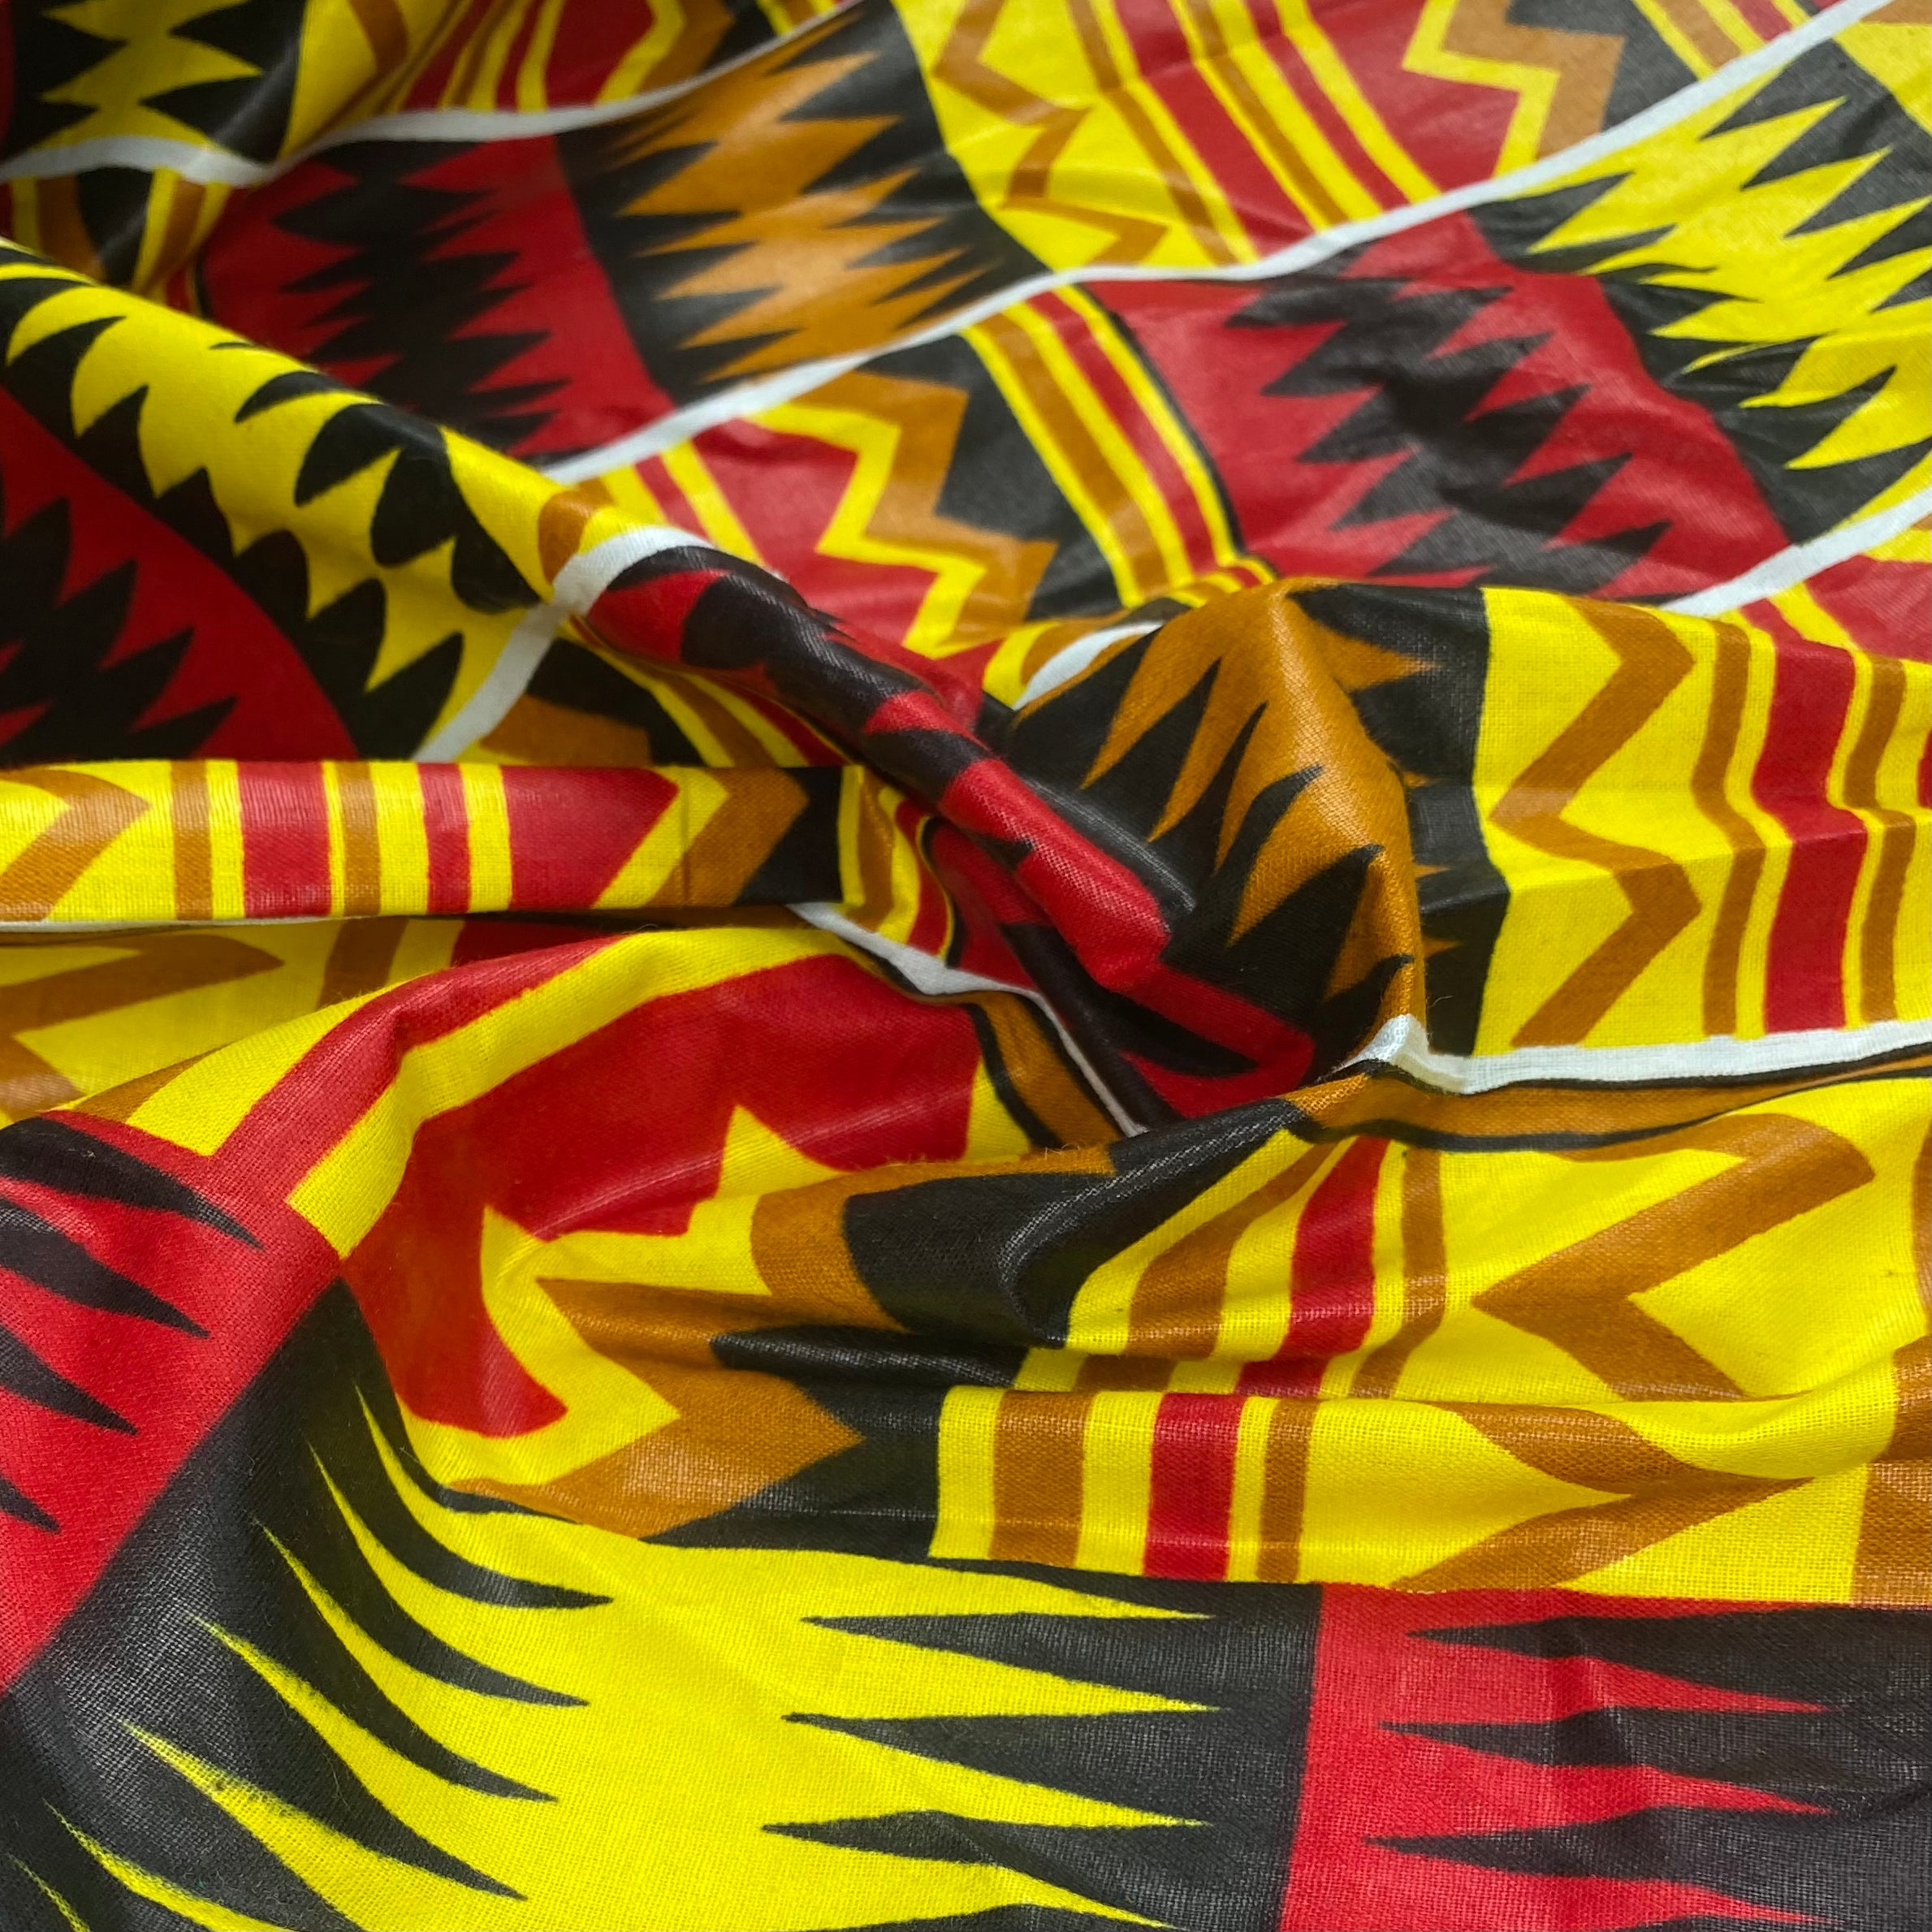 Waxed African Printed Cotton - Multi-Colour / Yellow / Red